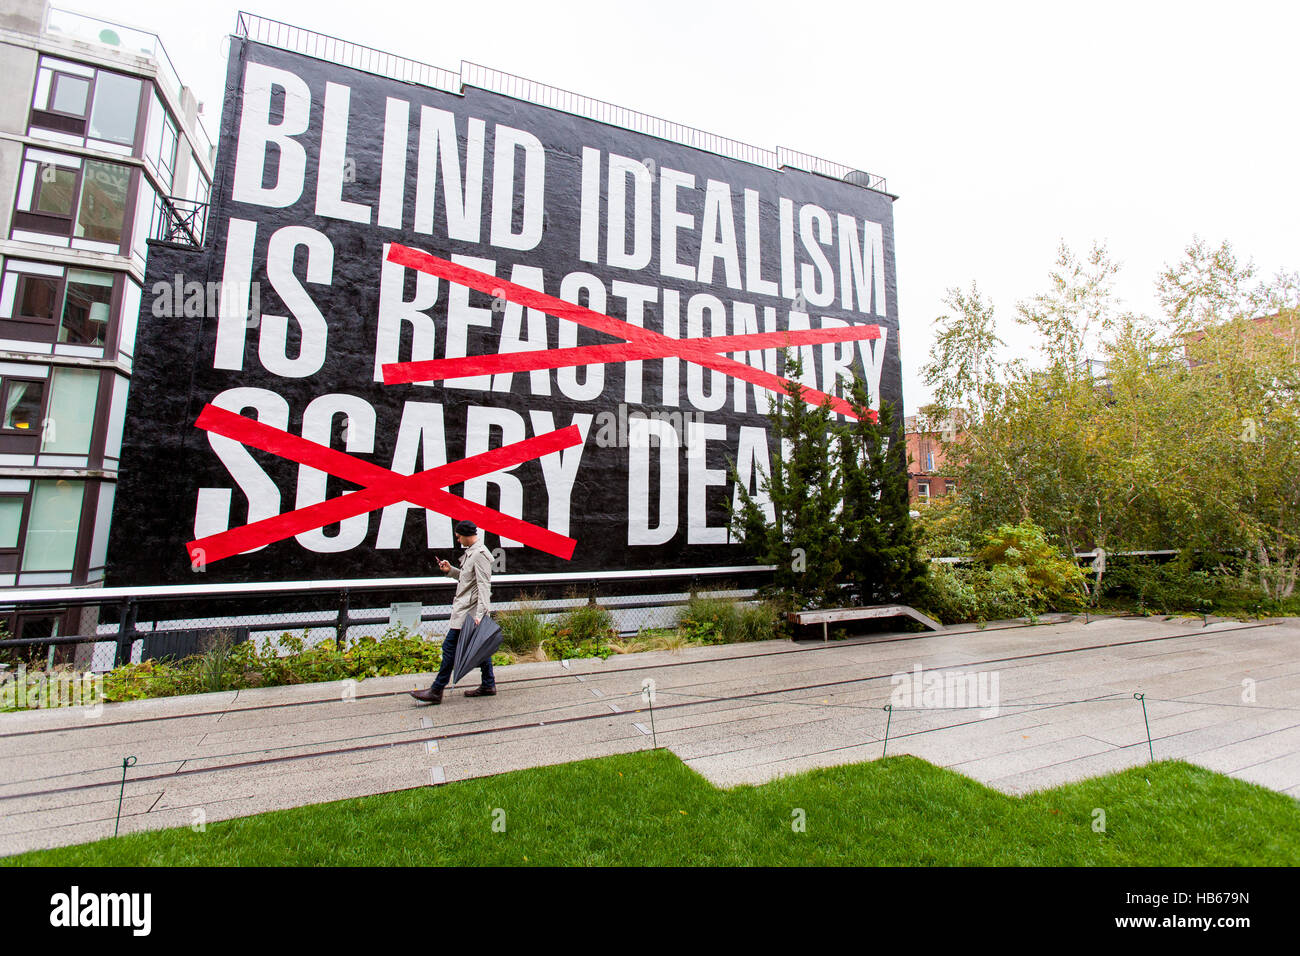 Blind idealism is Deadly by Barbara Kruger a large mural painted on the side of a building in High Line Park, New York City, America. Stock Photo